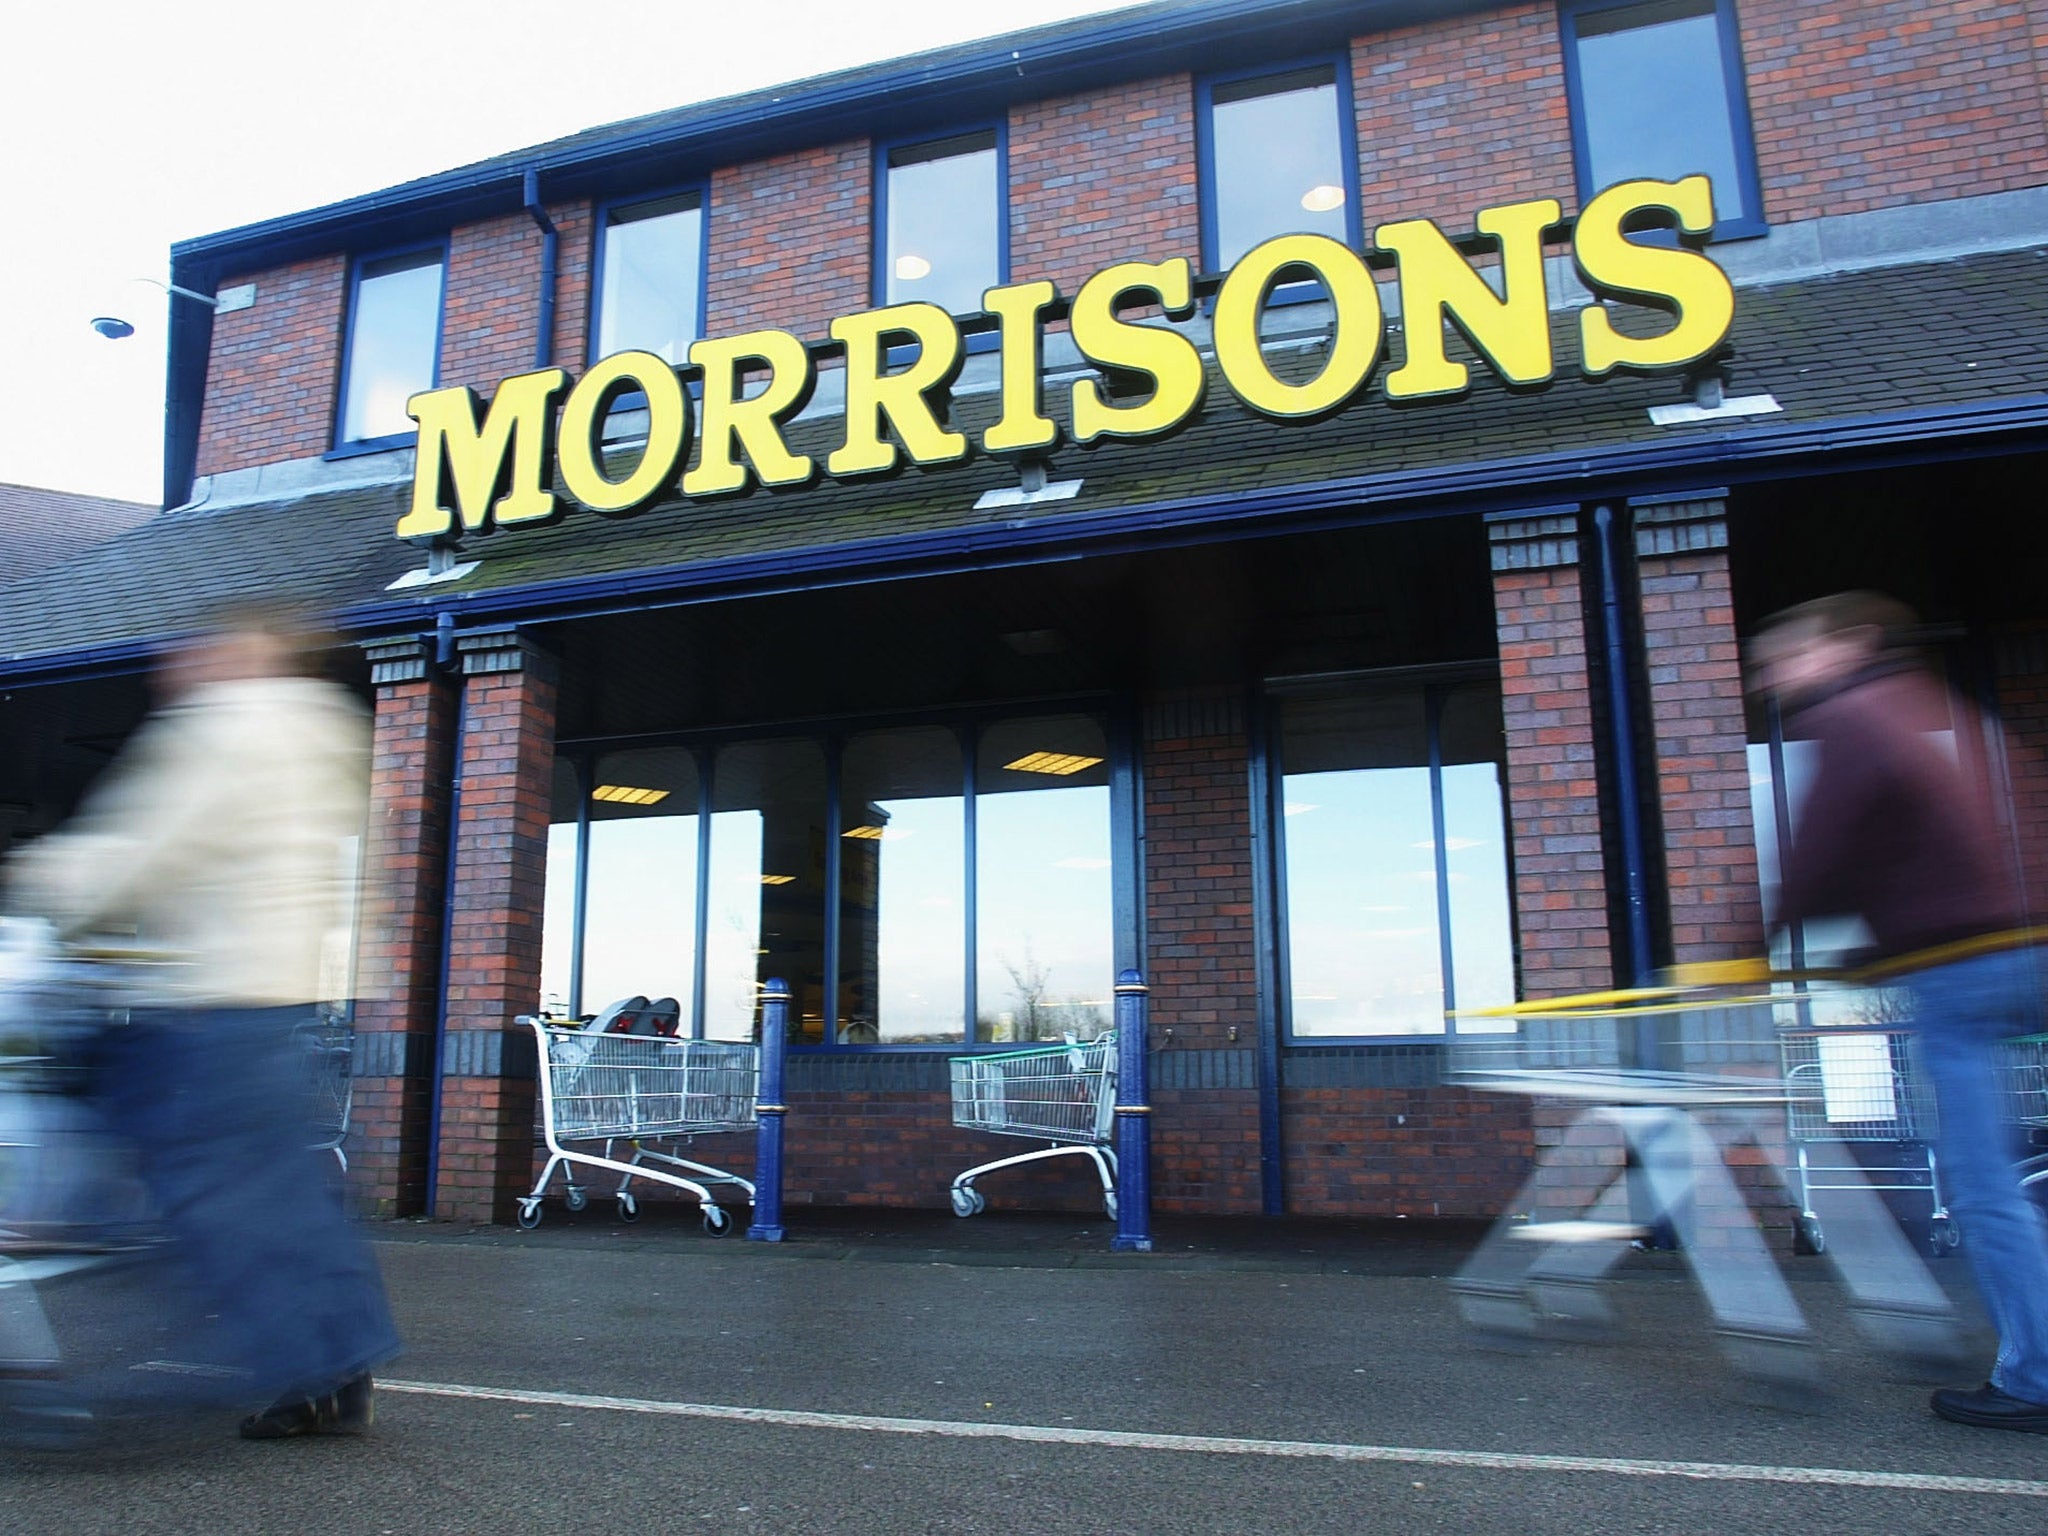 Morrisons employs 20,000 people in Yorkshire